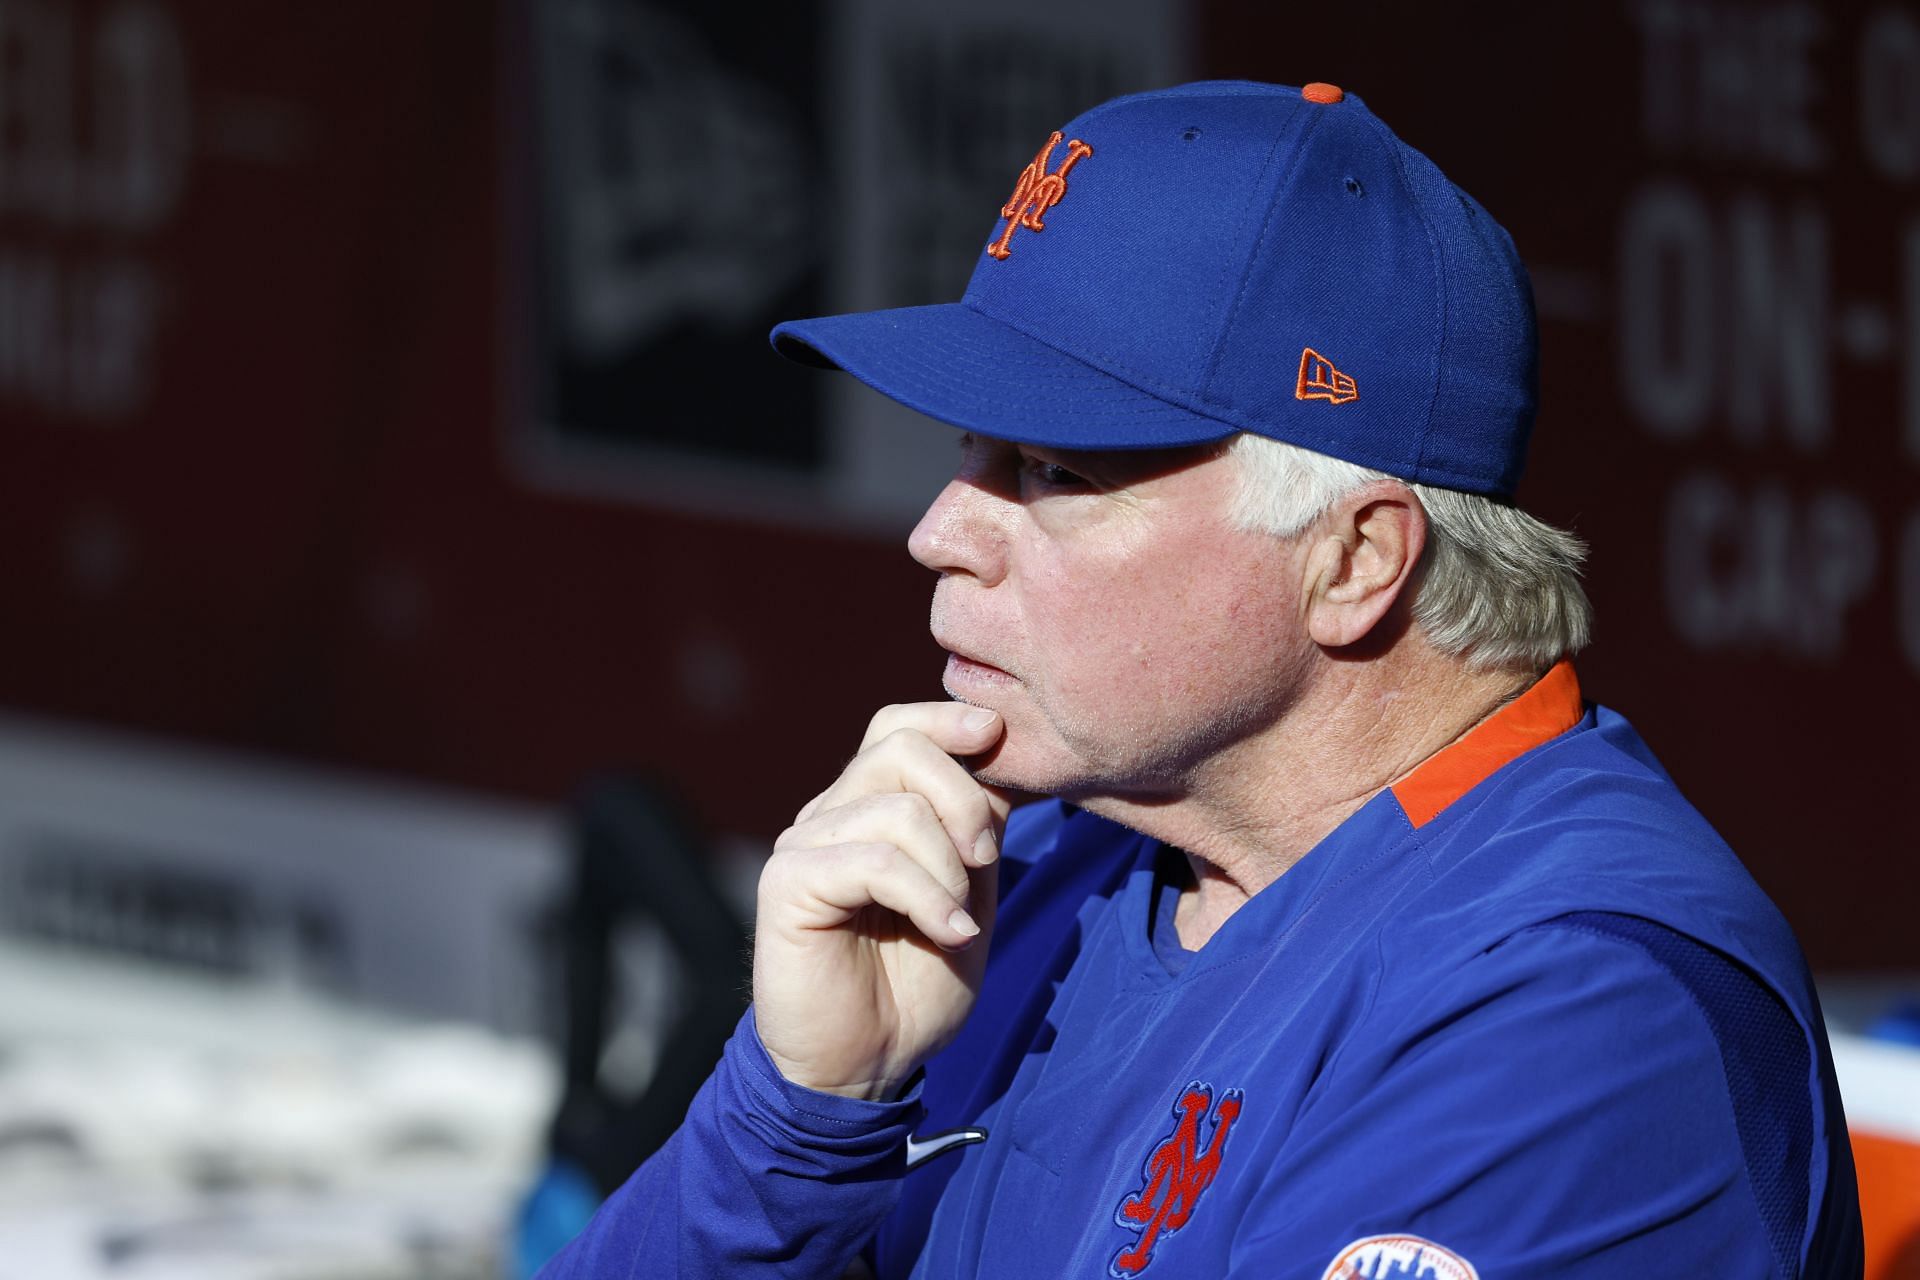 Buck Showalter's influence on the New York Mets cannot be underestimated